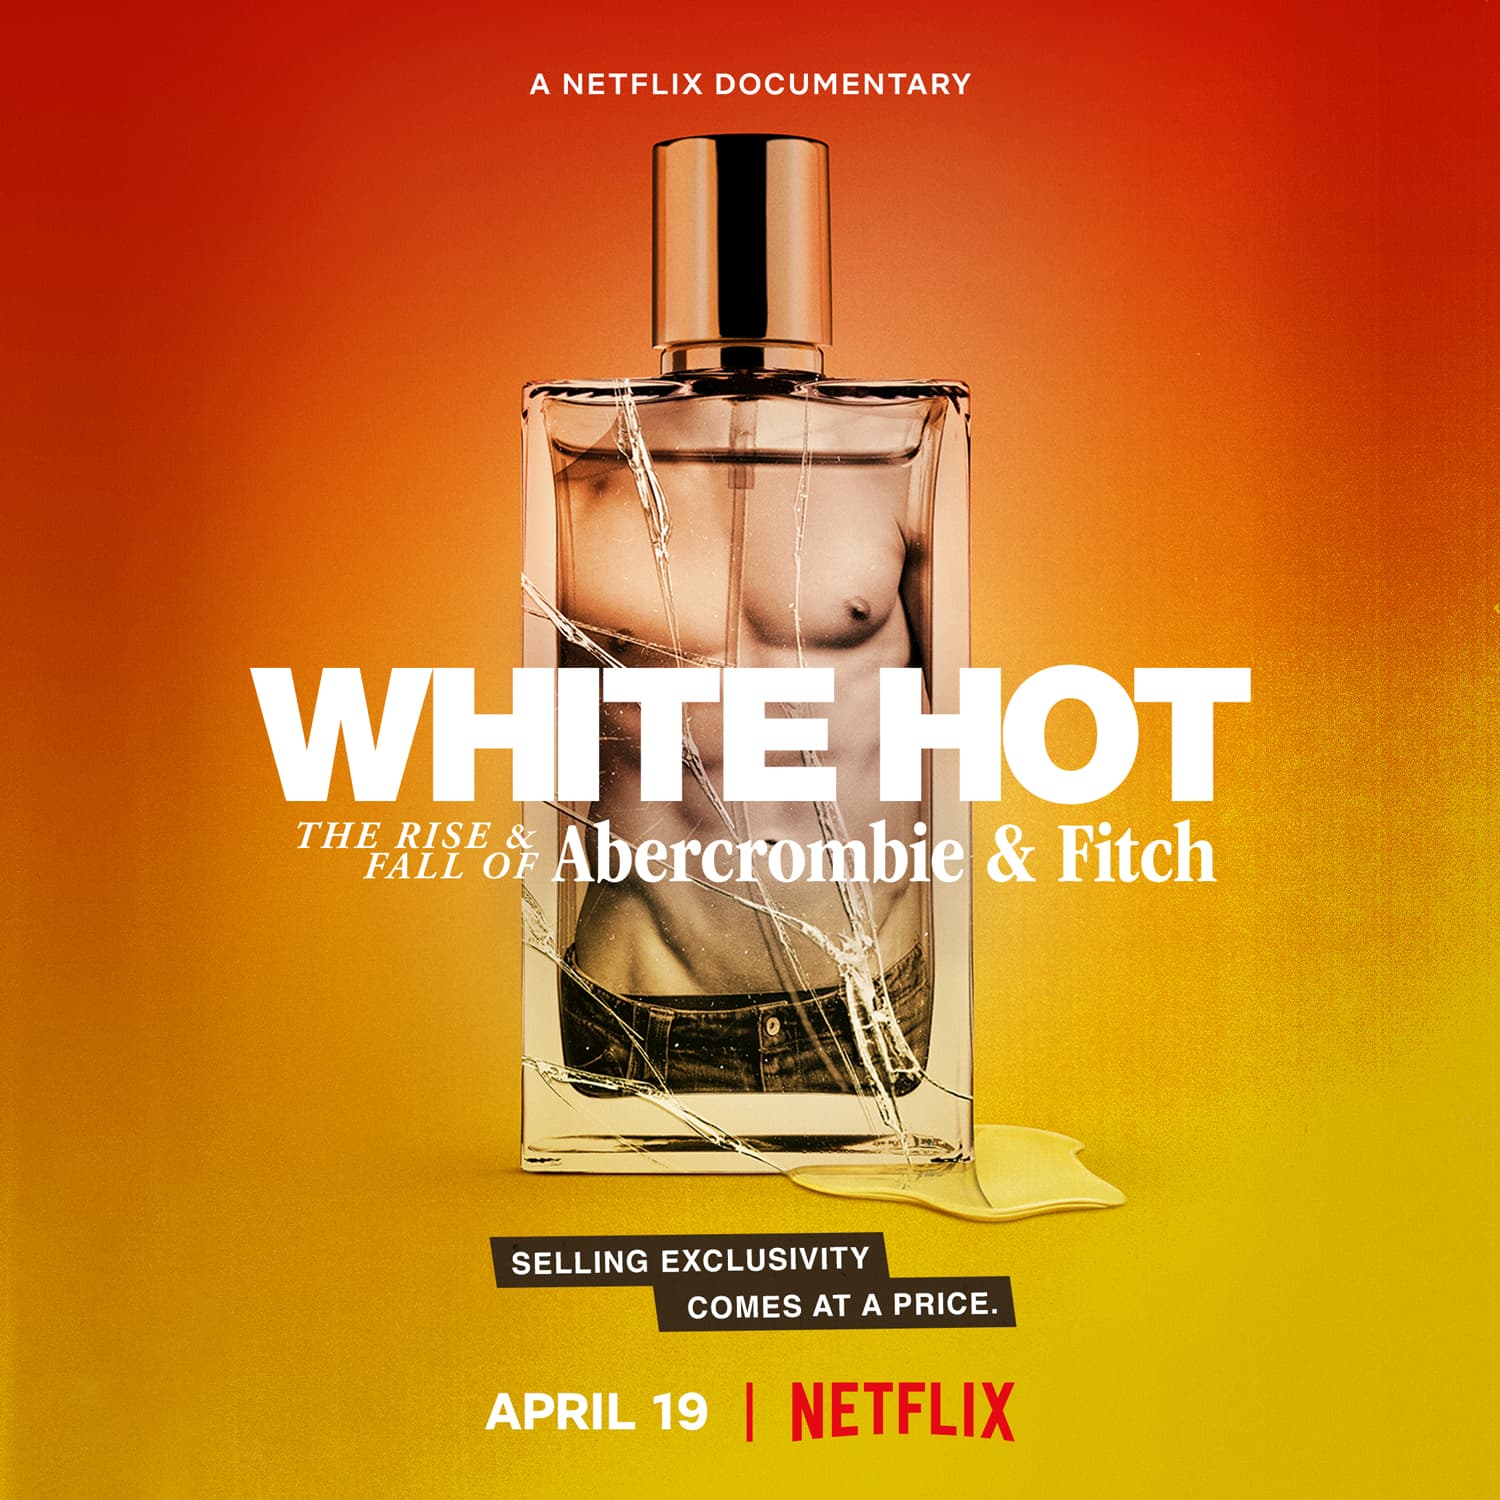 Netflix Releases Alison Klayman’s New Doc, “White Hot: The Rise & Fall of Abercrombie & Fitch”